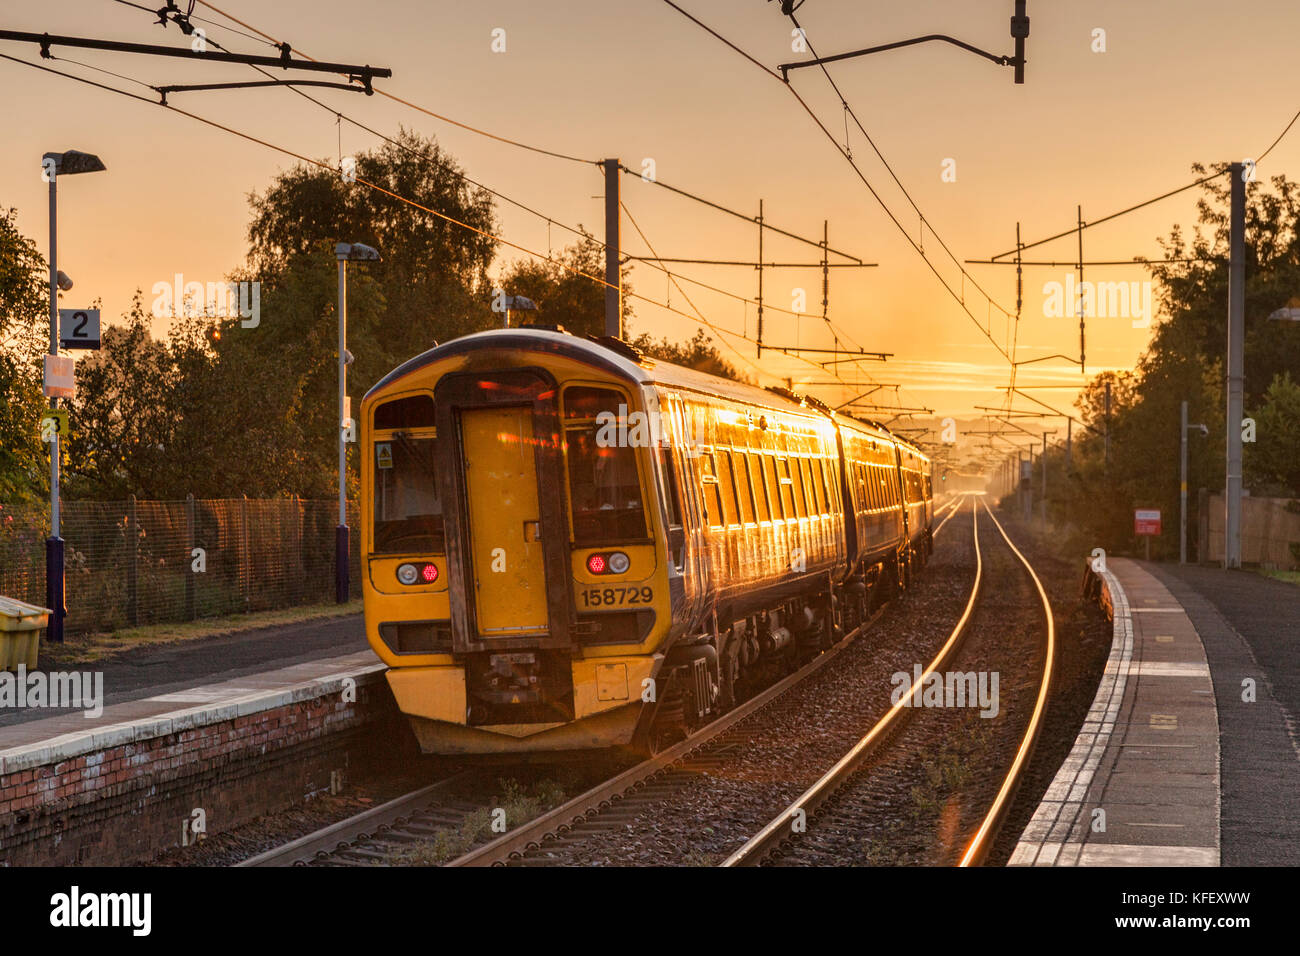 Early train leaving station with sun shining on it. Stock Photo